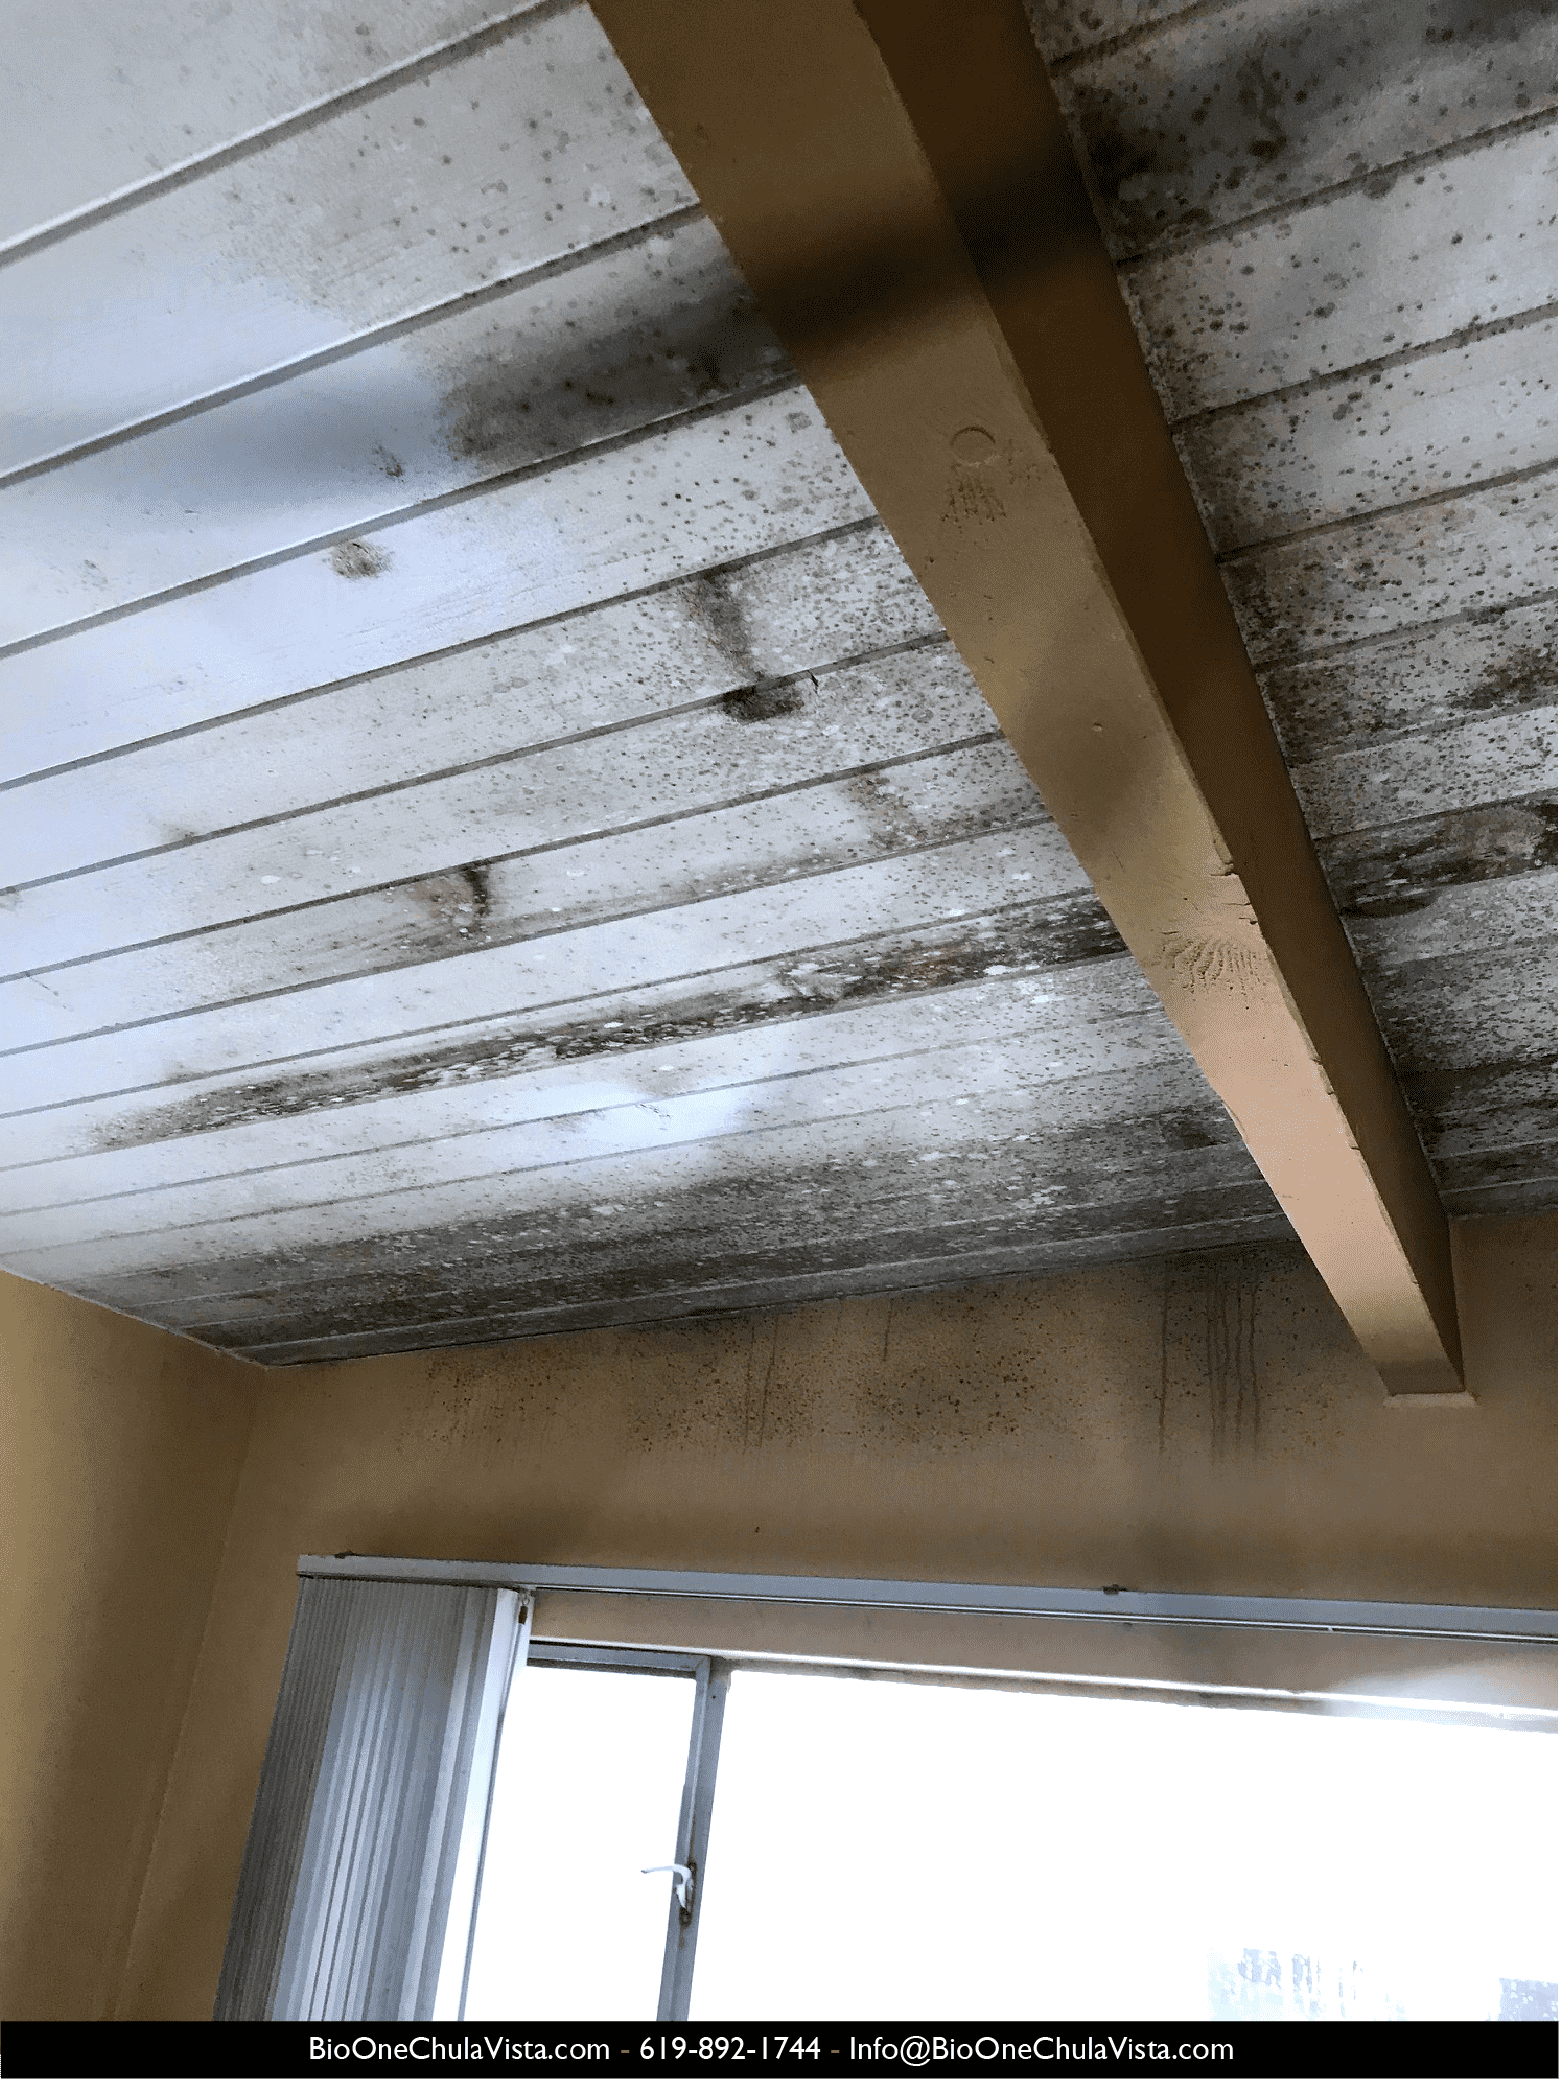 Image shows black mold in a bathroom ceiling.